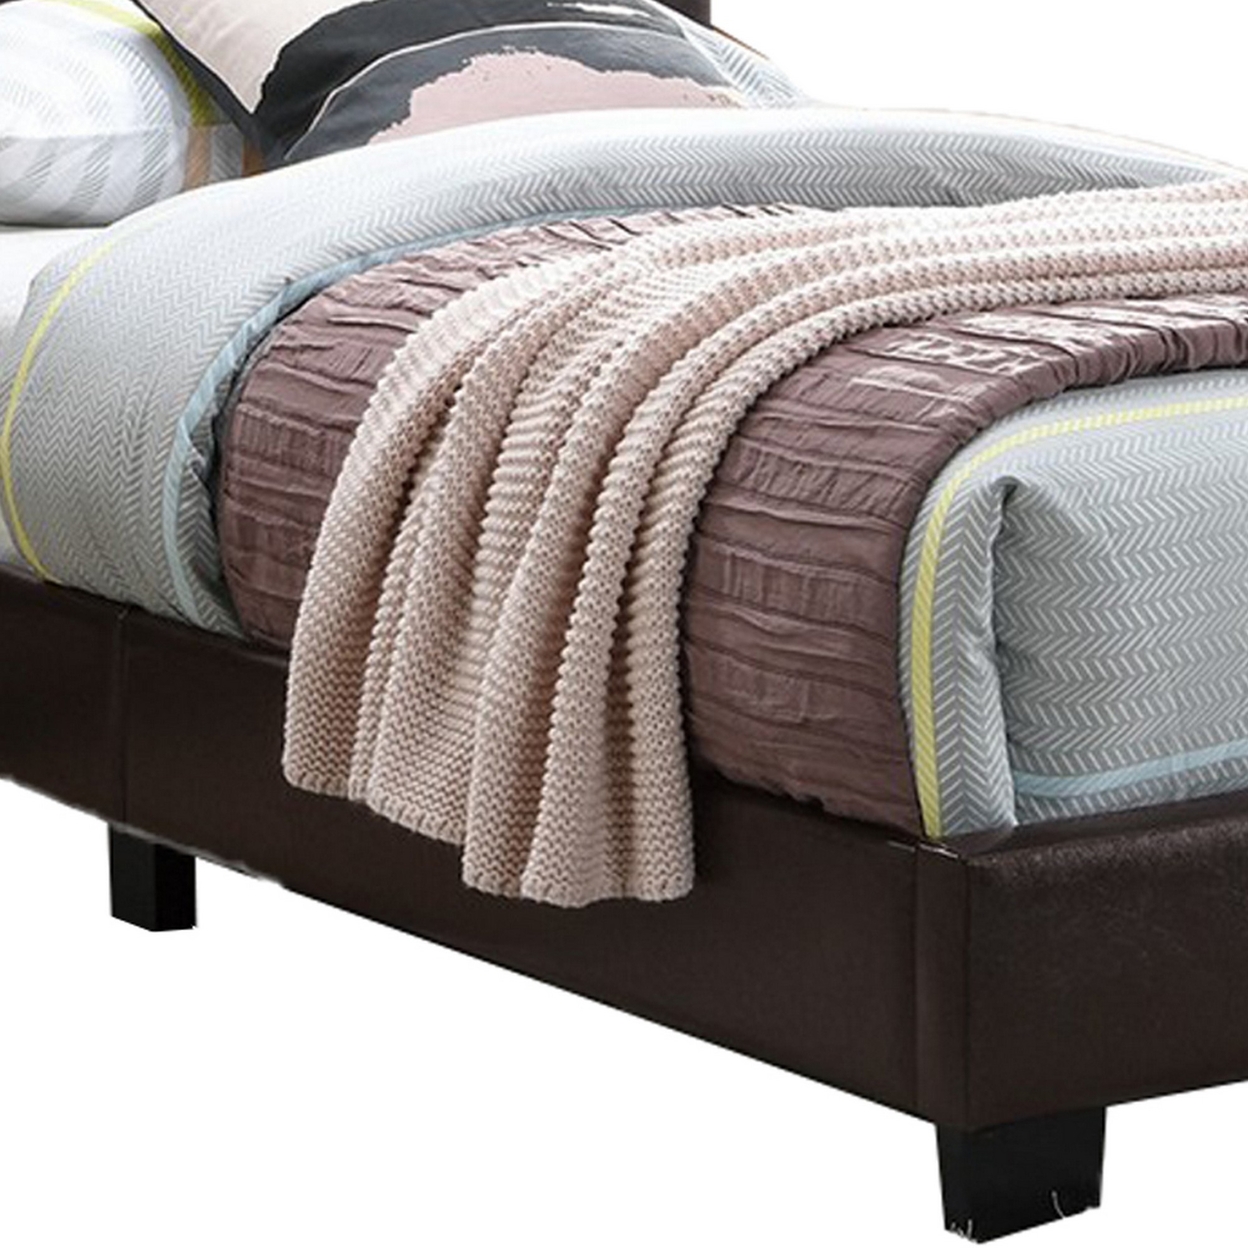 Transitional Style Leatherette Full Bed With Padded Headboard, Dark Brown- Saltoro Sherpi